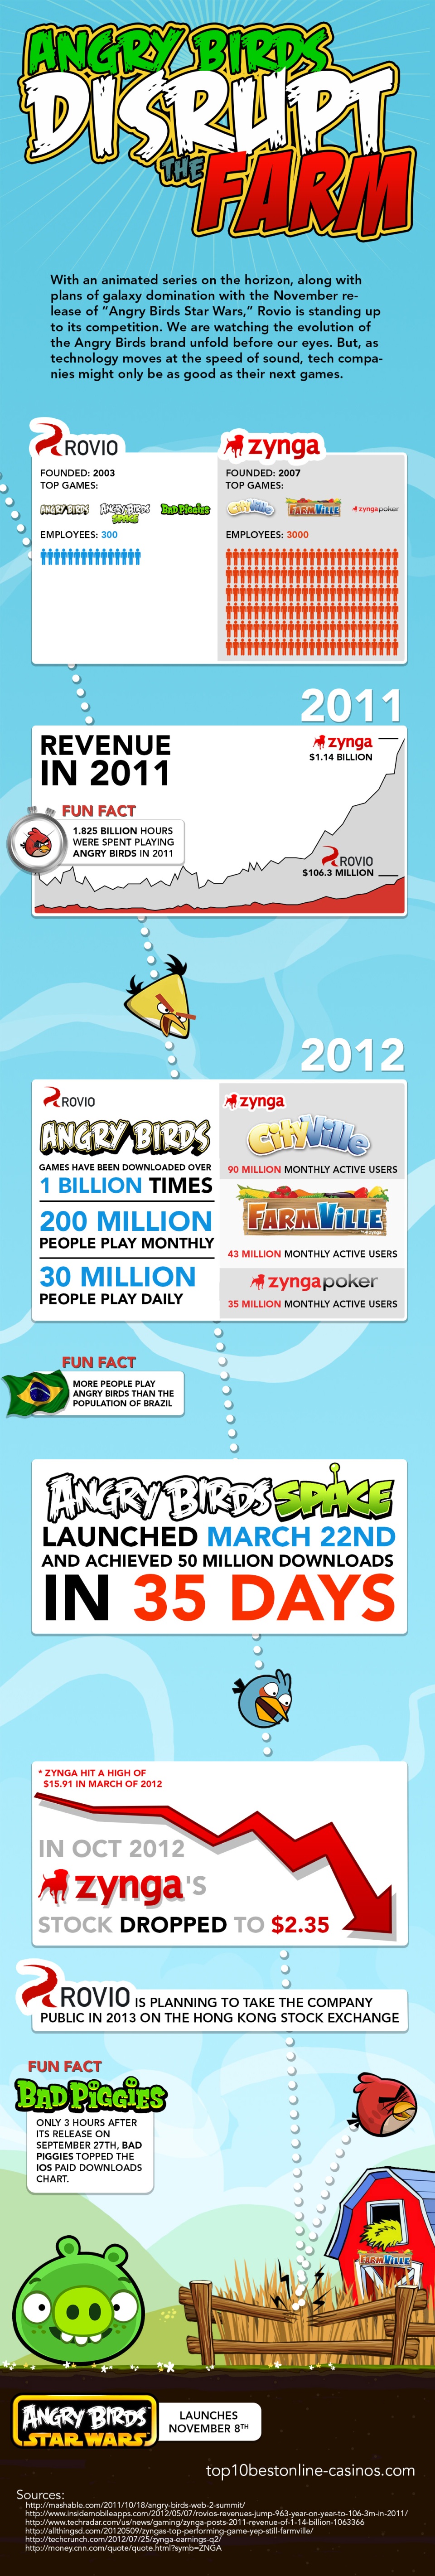 Angry birds brand explosion